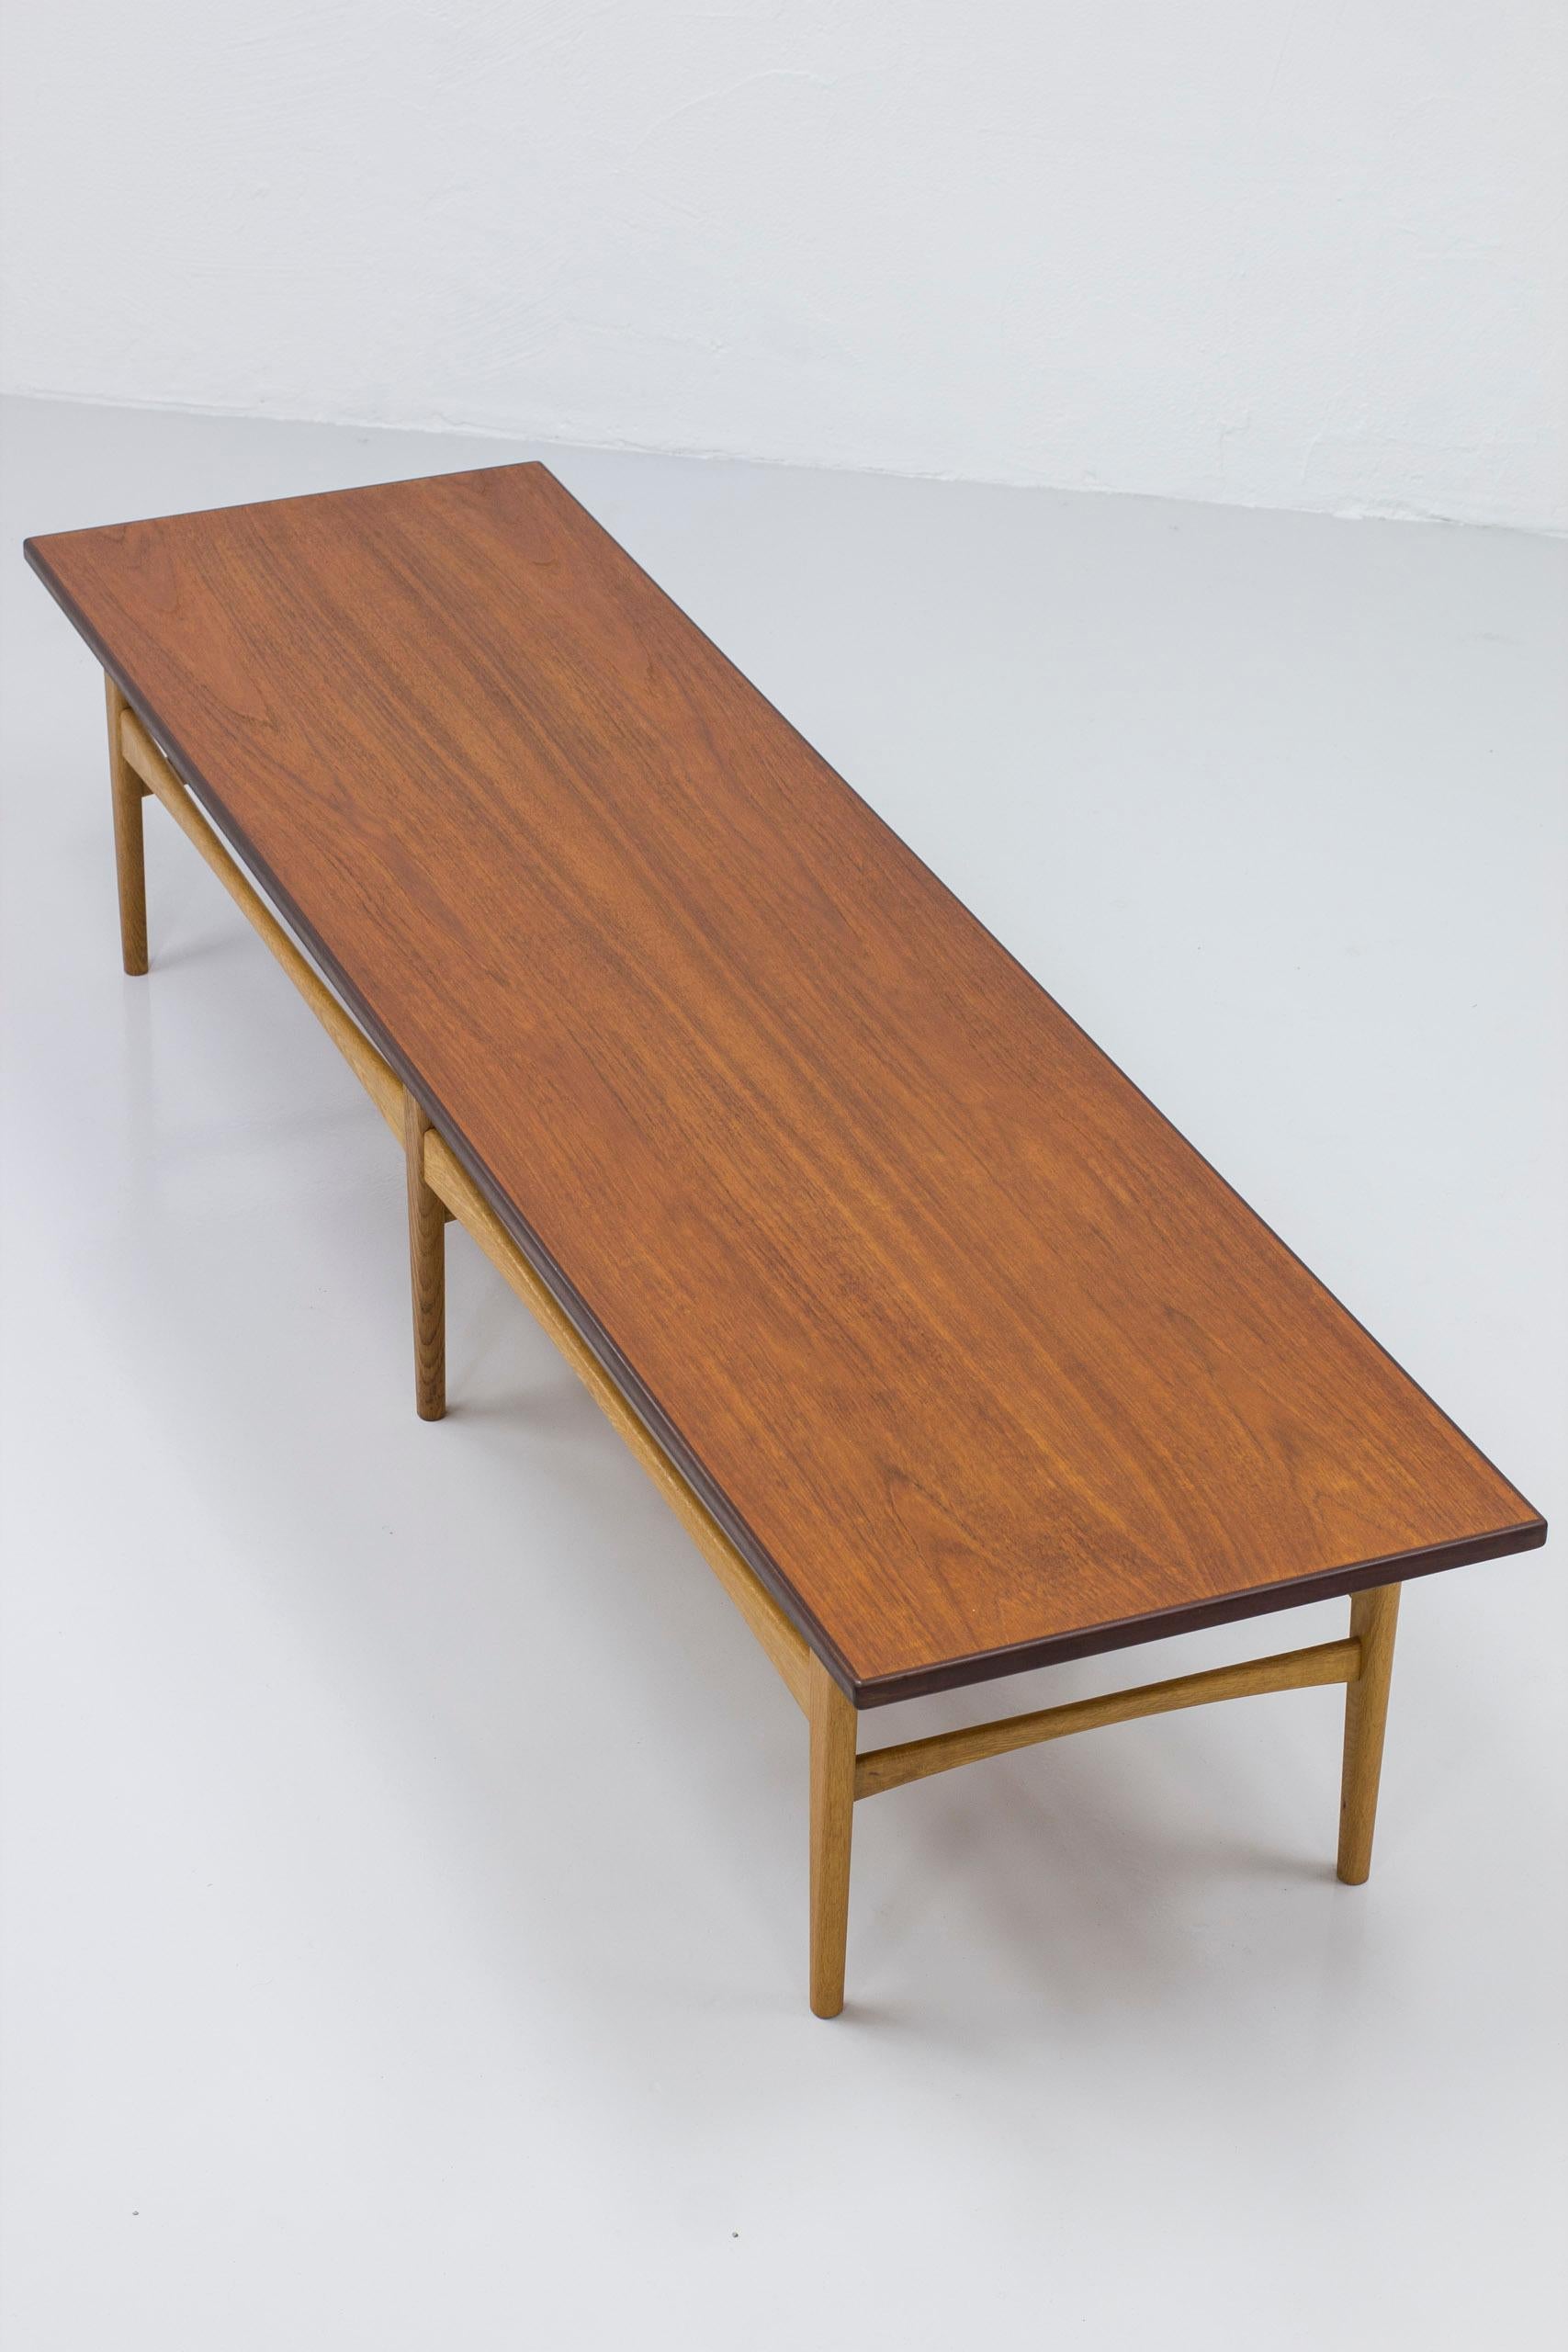 Teak and Oak Bench or Table by Eric Johansson for Abra, Sweden, 1950s For Sale 3